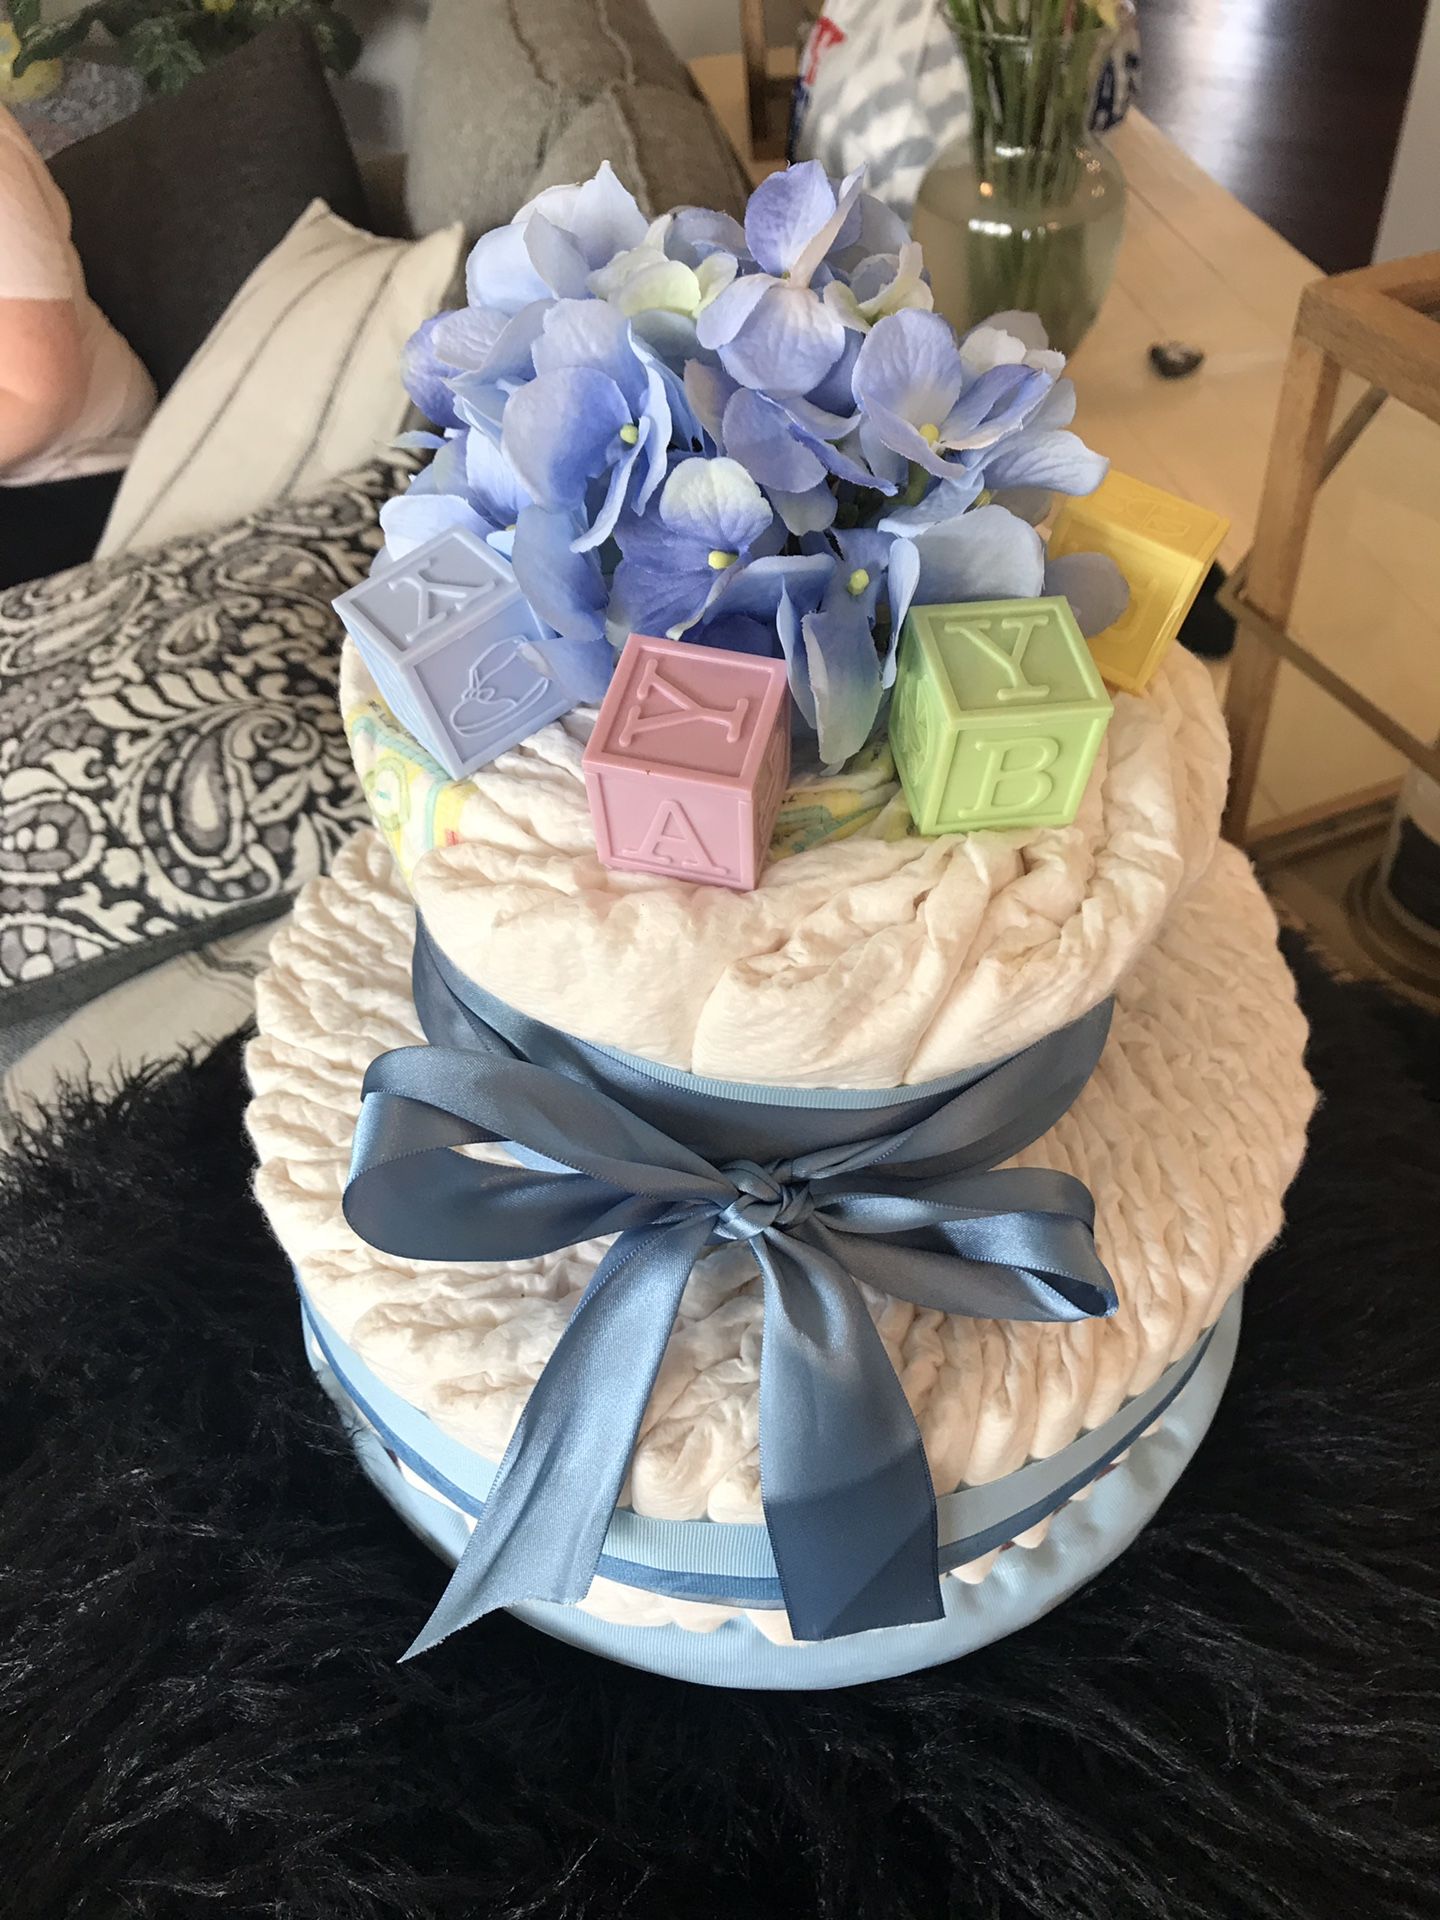 Diaper cake with 45+ size 1 diapers